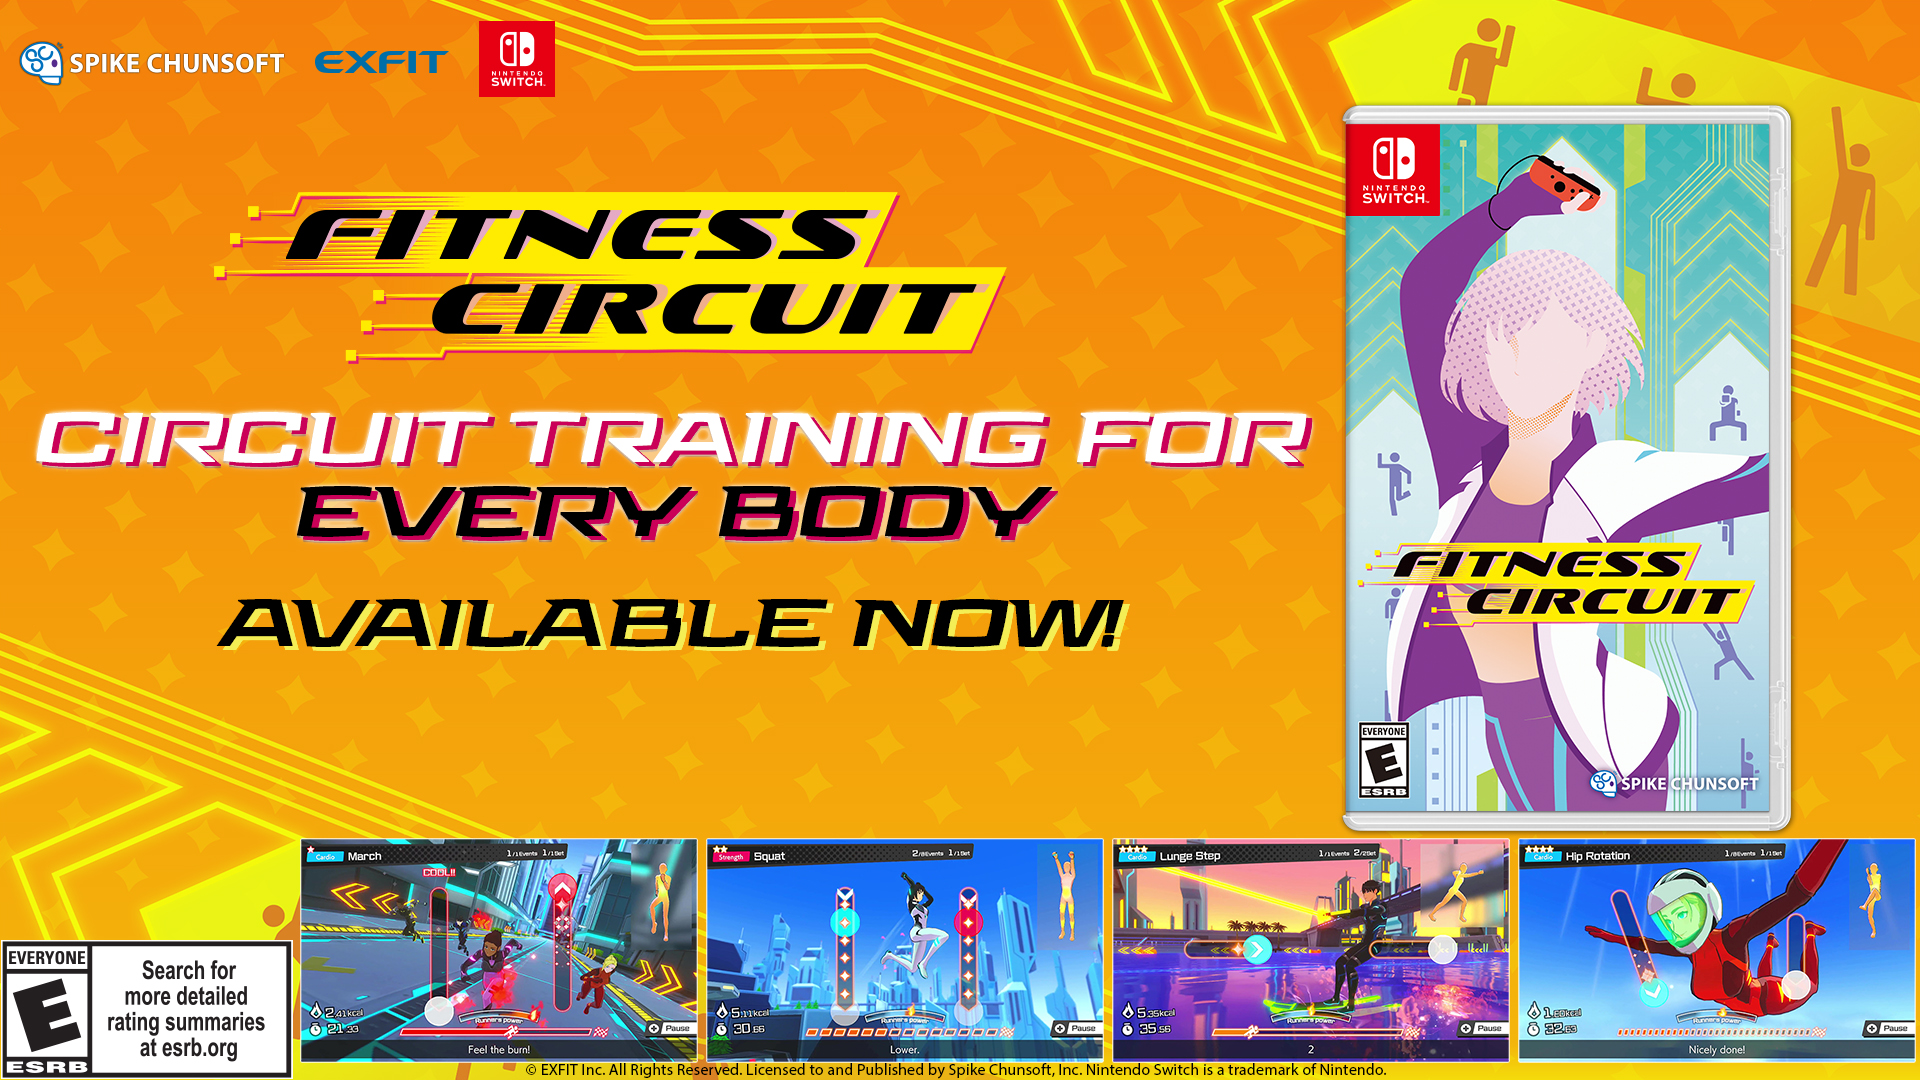 Fitness Circuit Circuit Training For Everybody Available Now!